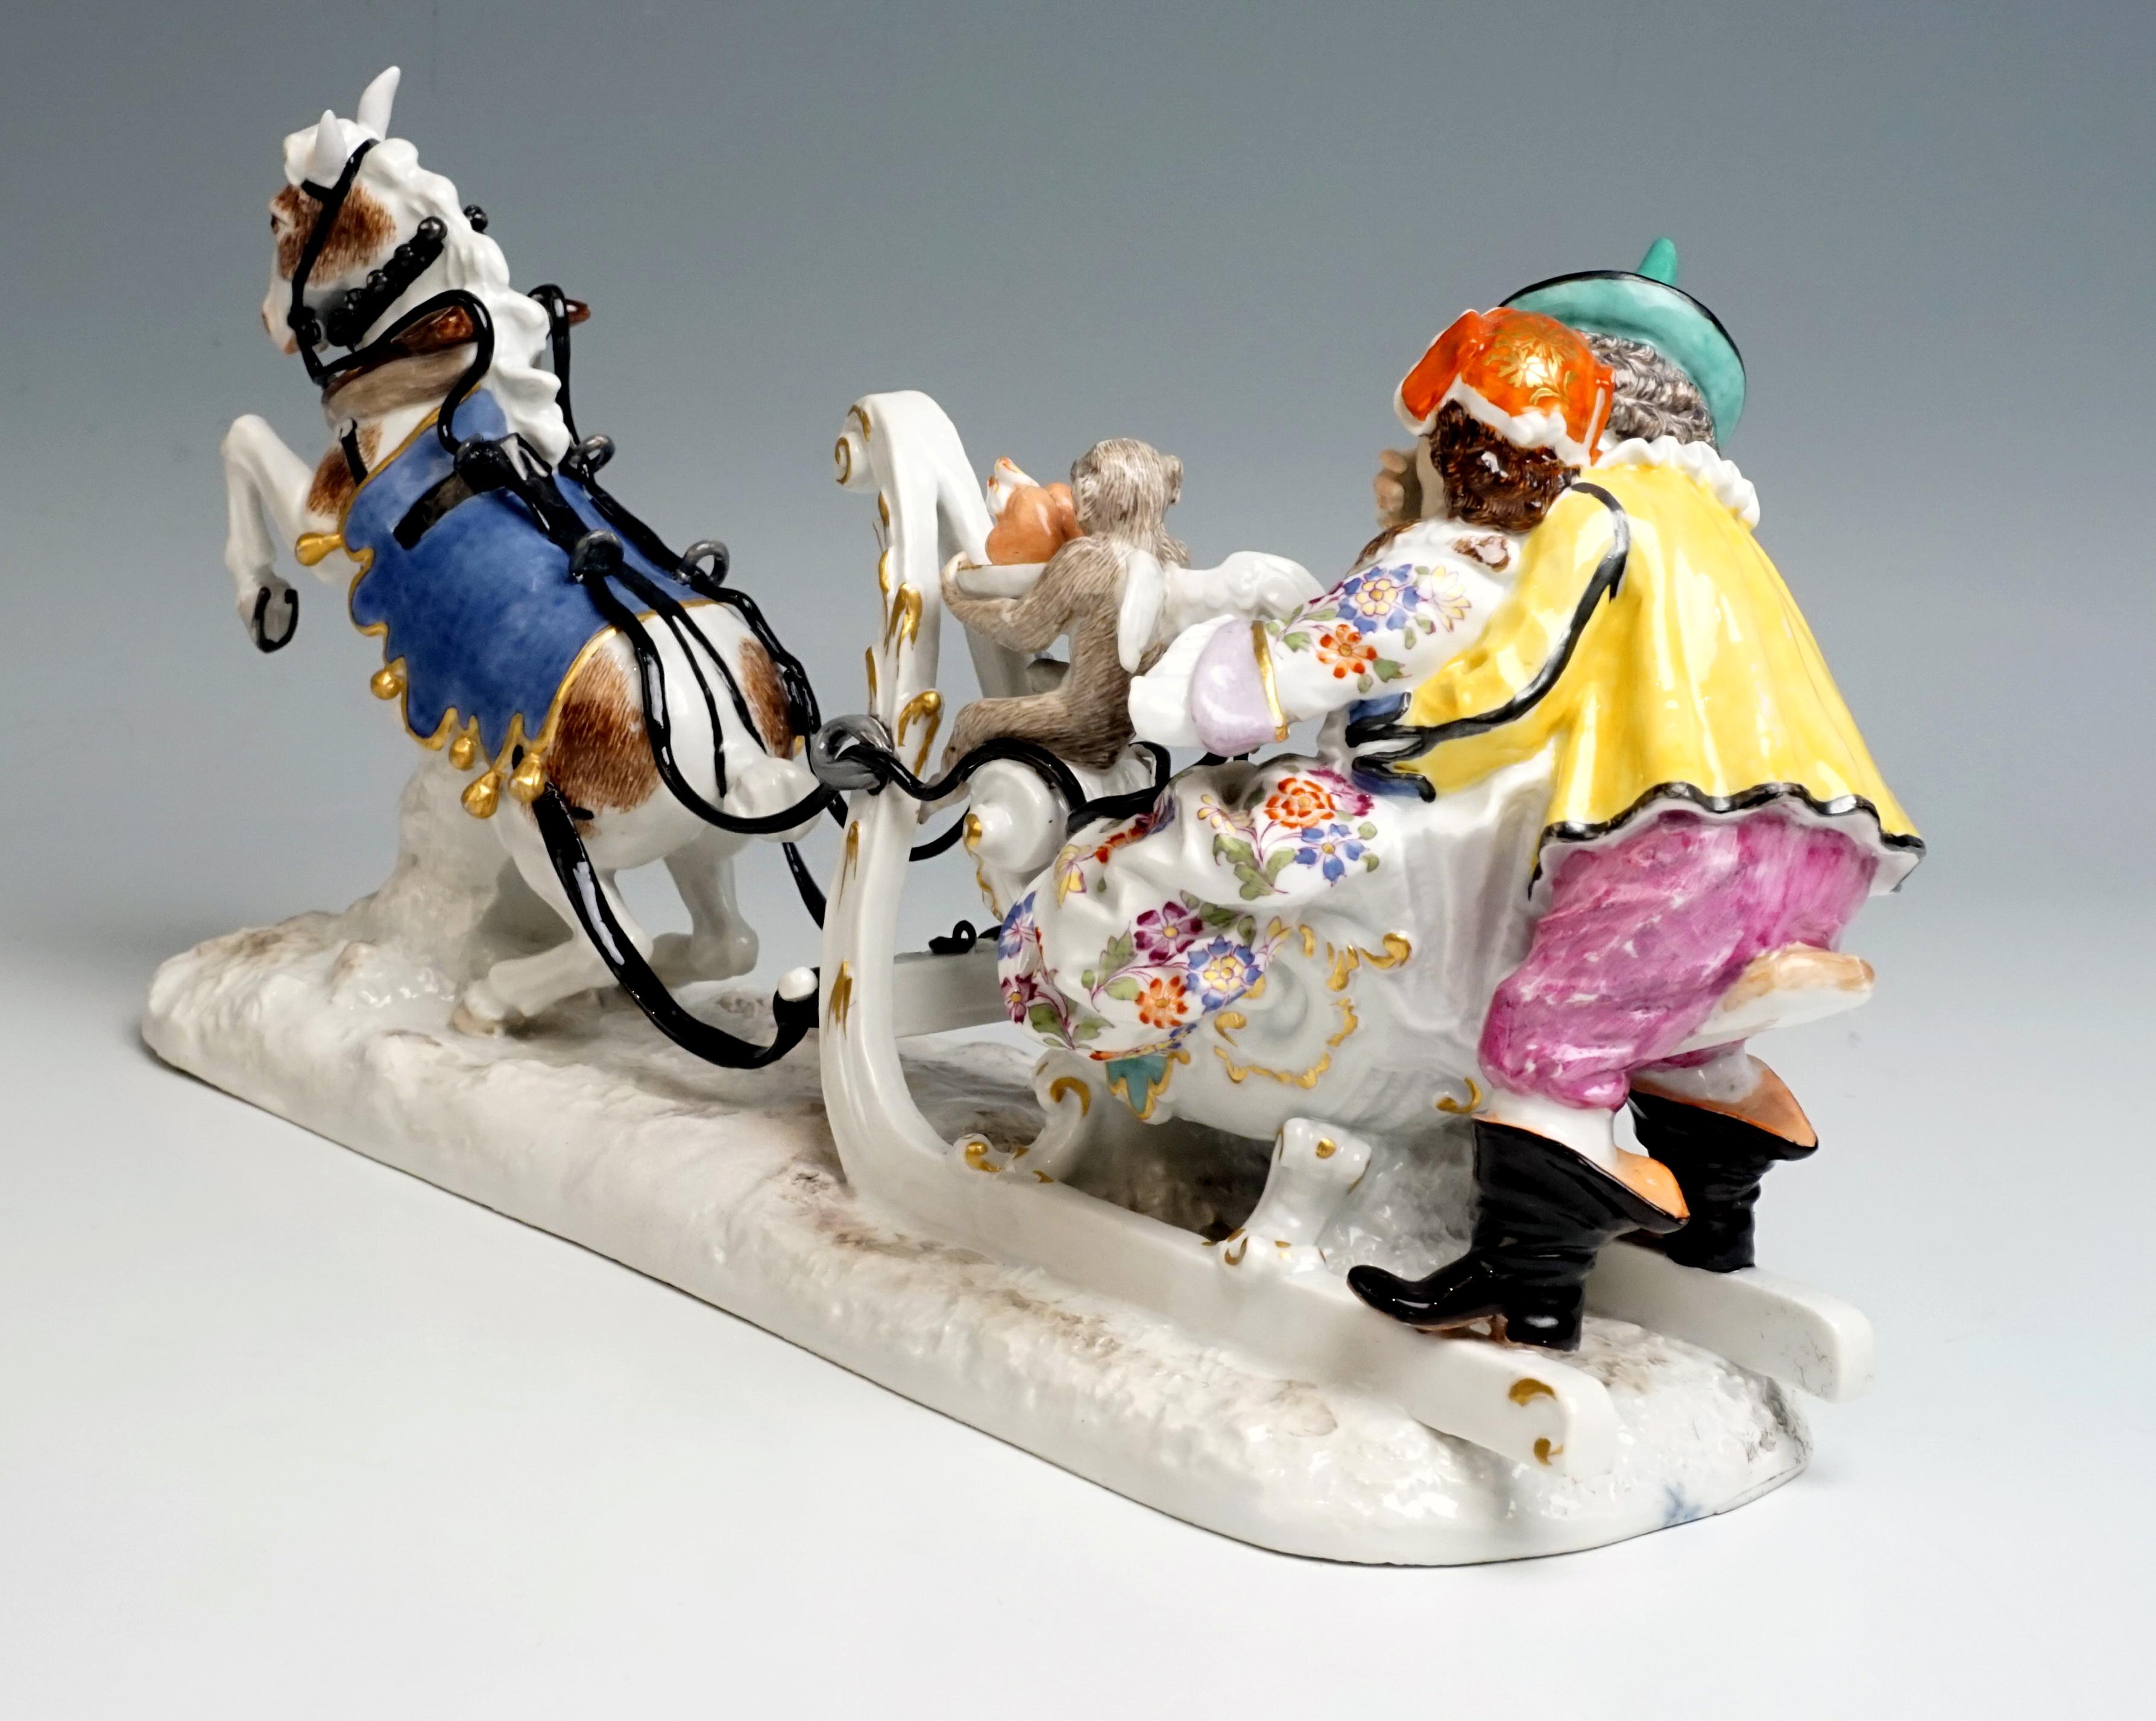 Hand-Crafted Baroque Meissen Group Sleigh Ride with The Court Jesters by Kaendler circa 1750